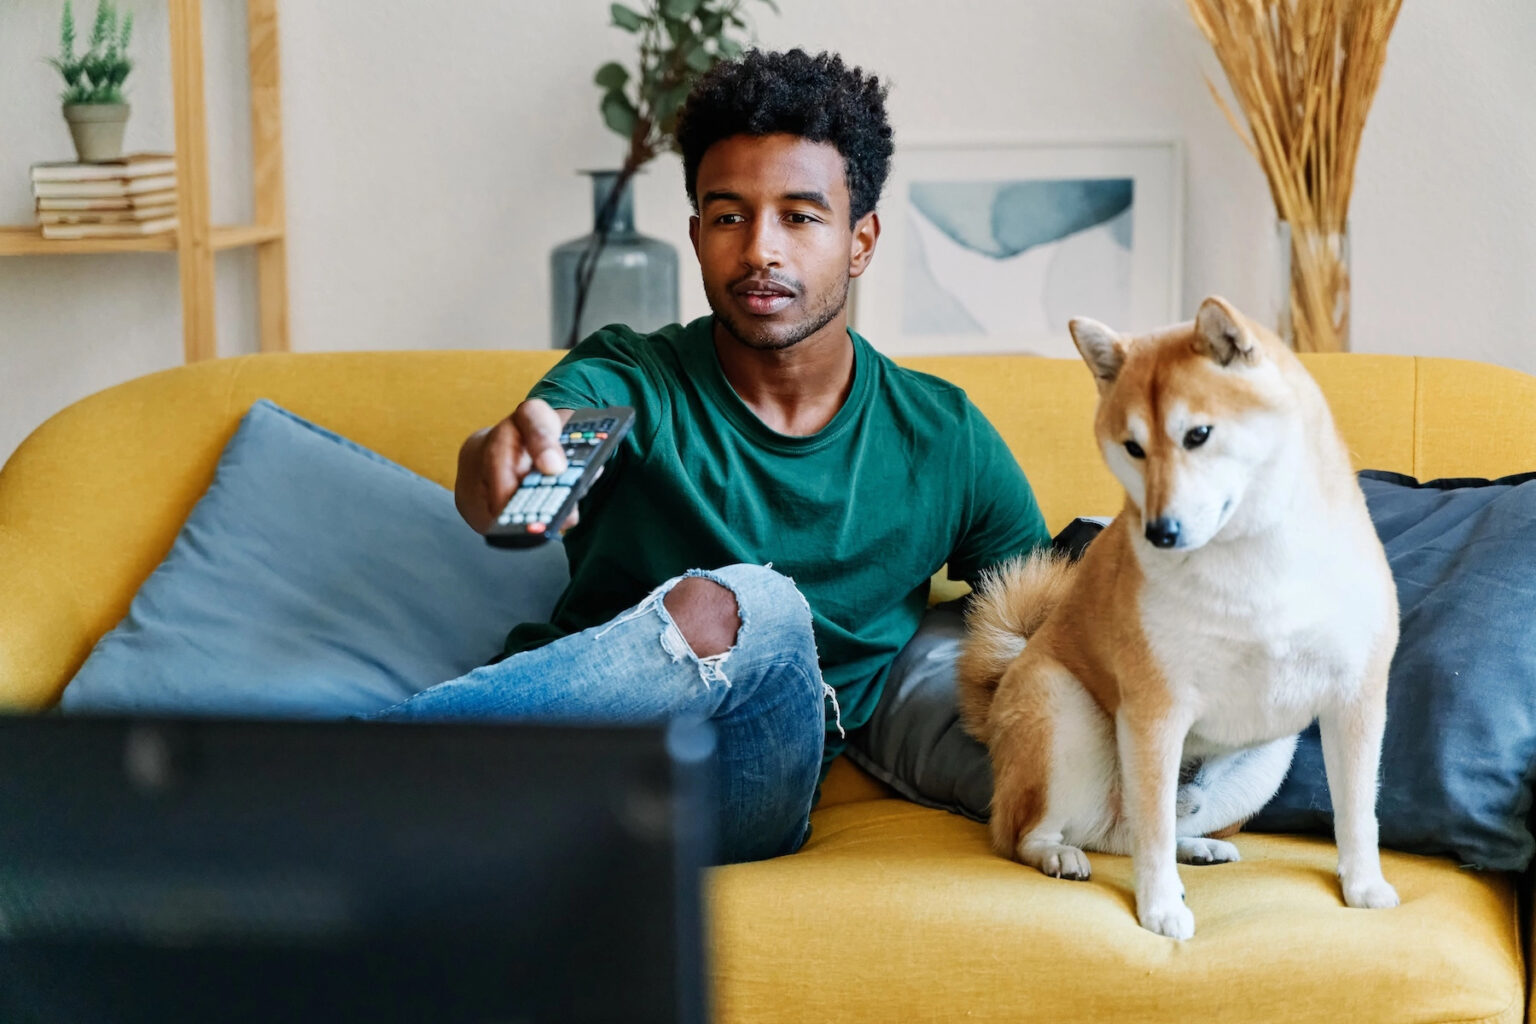 A man sits on the couch beside his dog, turning on the television via remote